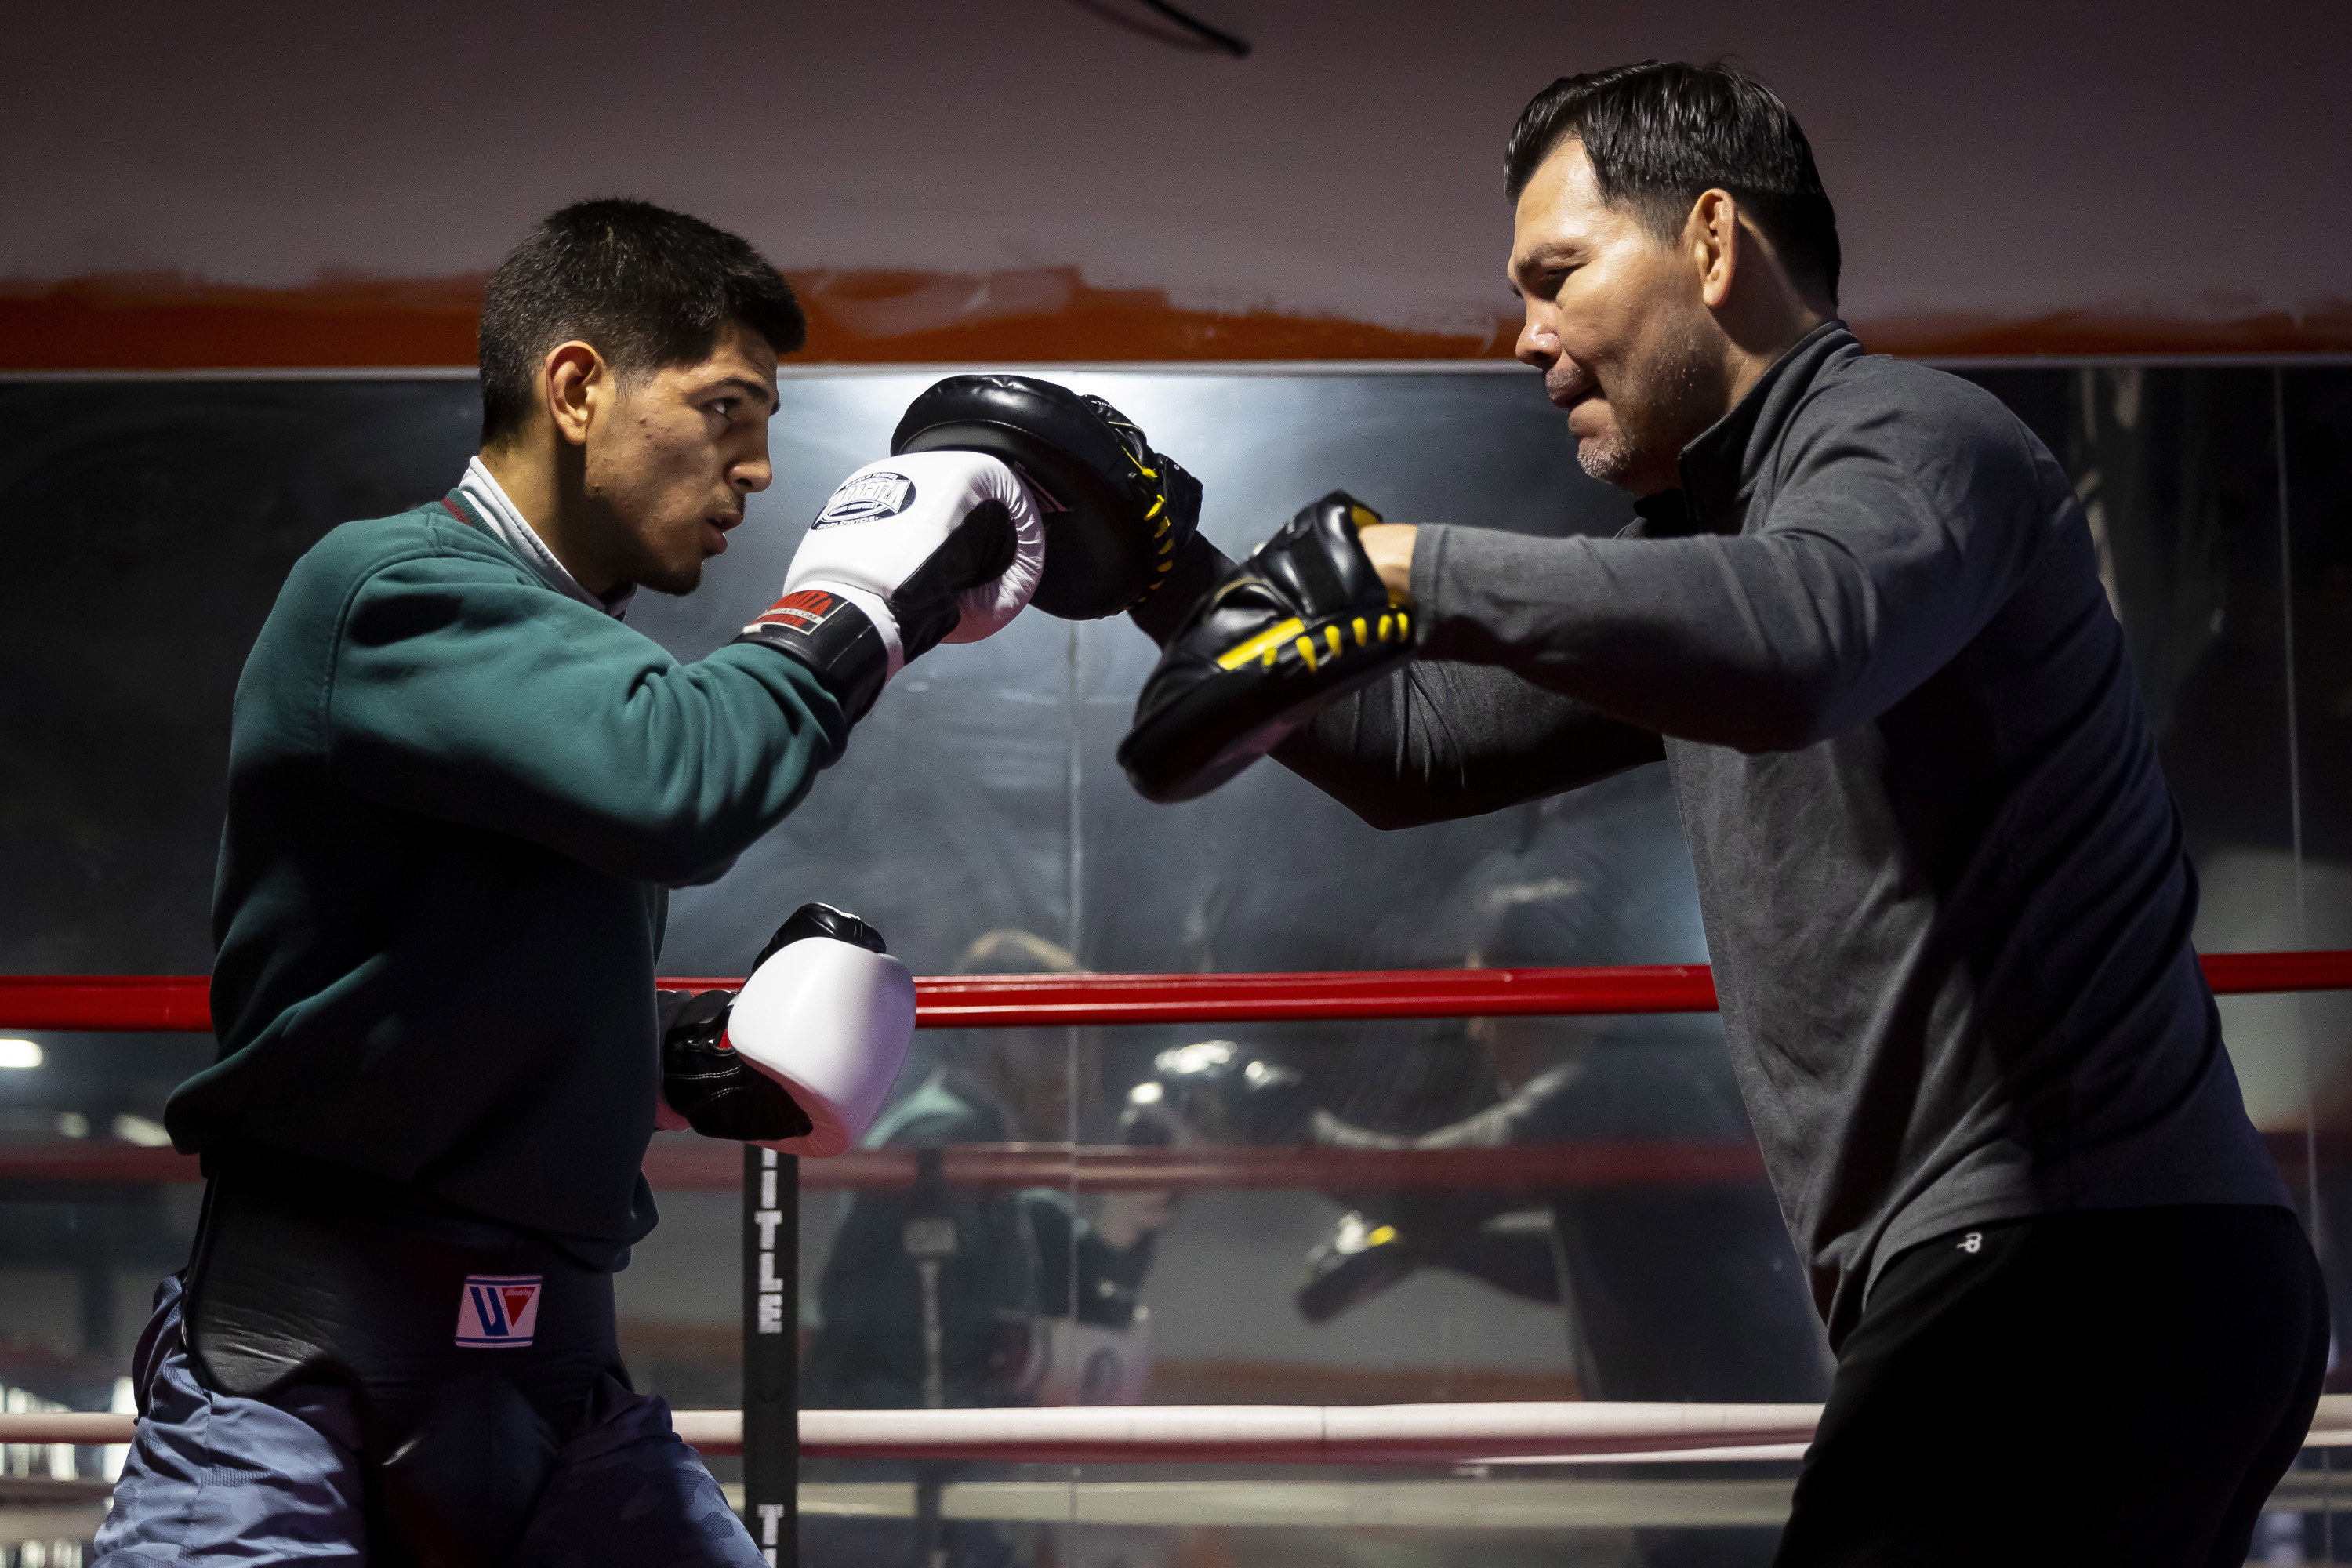 Giovanni Marquez training in the ring with his father, the former boxing world champion Raul Marquez, at the family’s gym in Humble, Texas